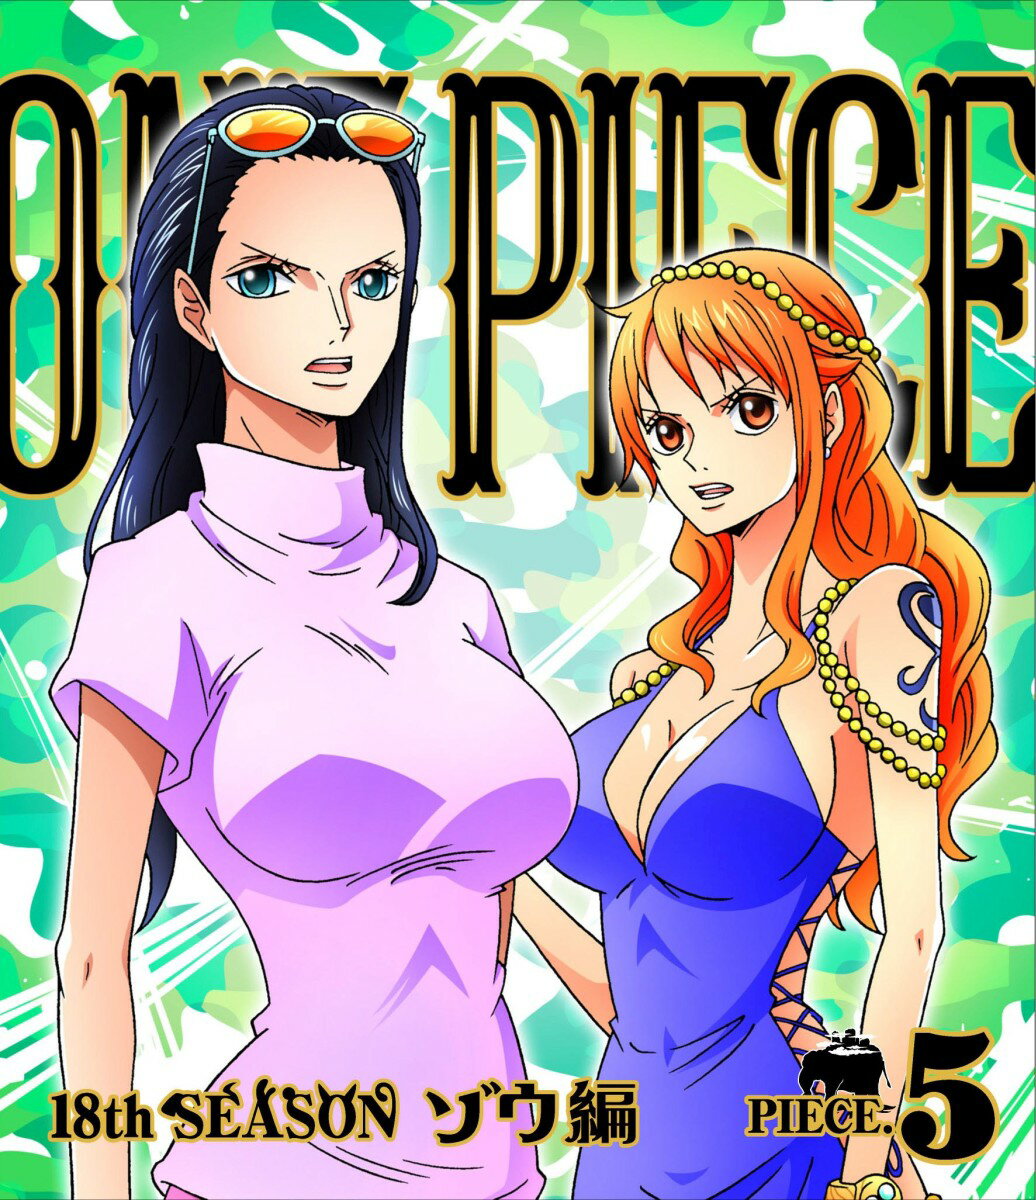 ONE PIECE ワンピース 18THシーズン ゾウ編 PIECE.5 [ 田中真弓 ]